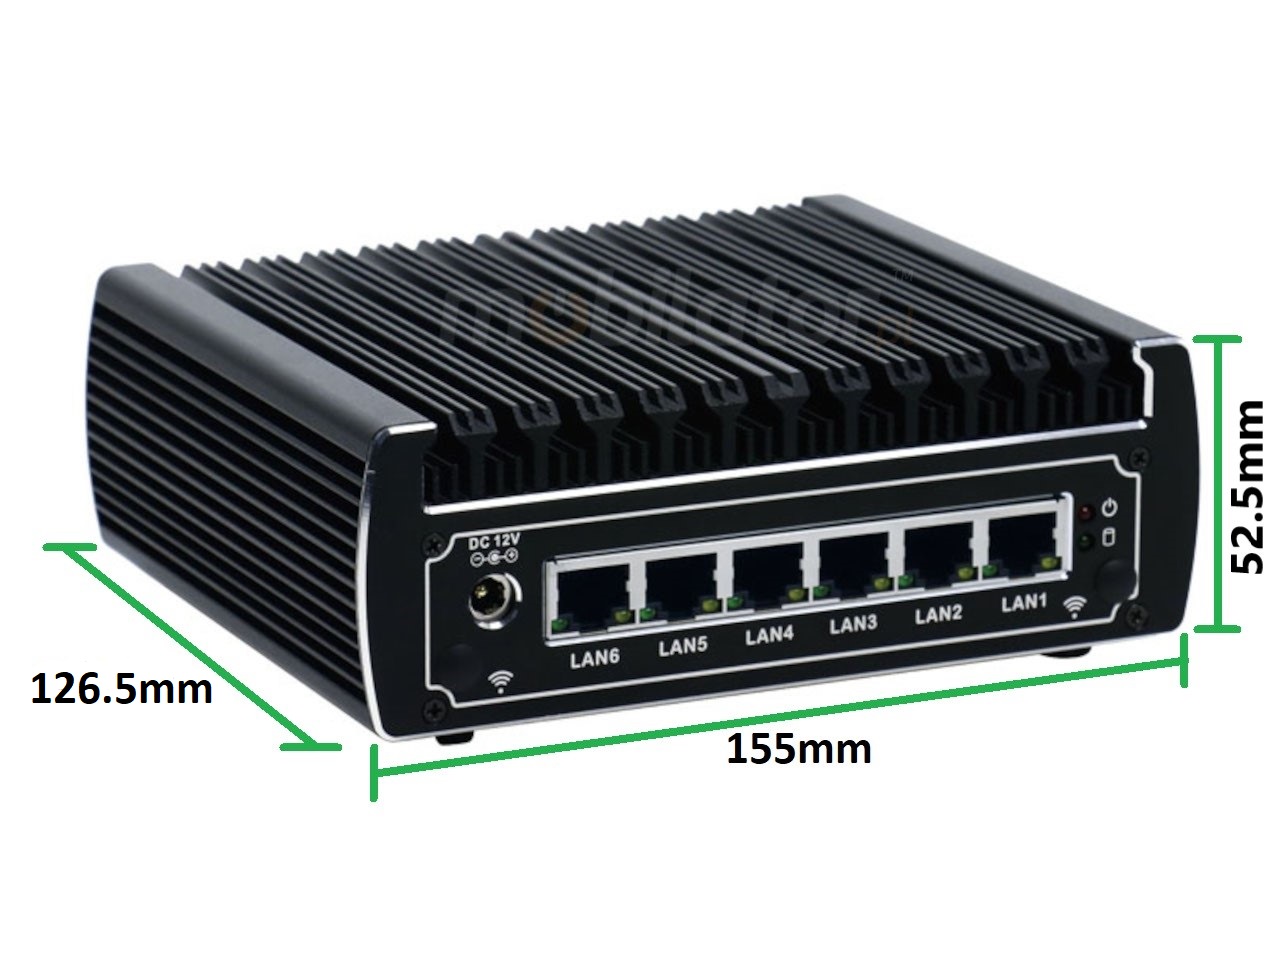  IBOX N133 v.10, size, industrial small fast reliable fanless industrial small LAN INTEL i3 SSD HDD DDR4 WIFI BLUETOOTH